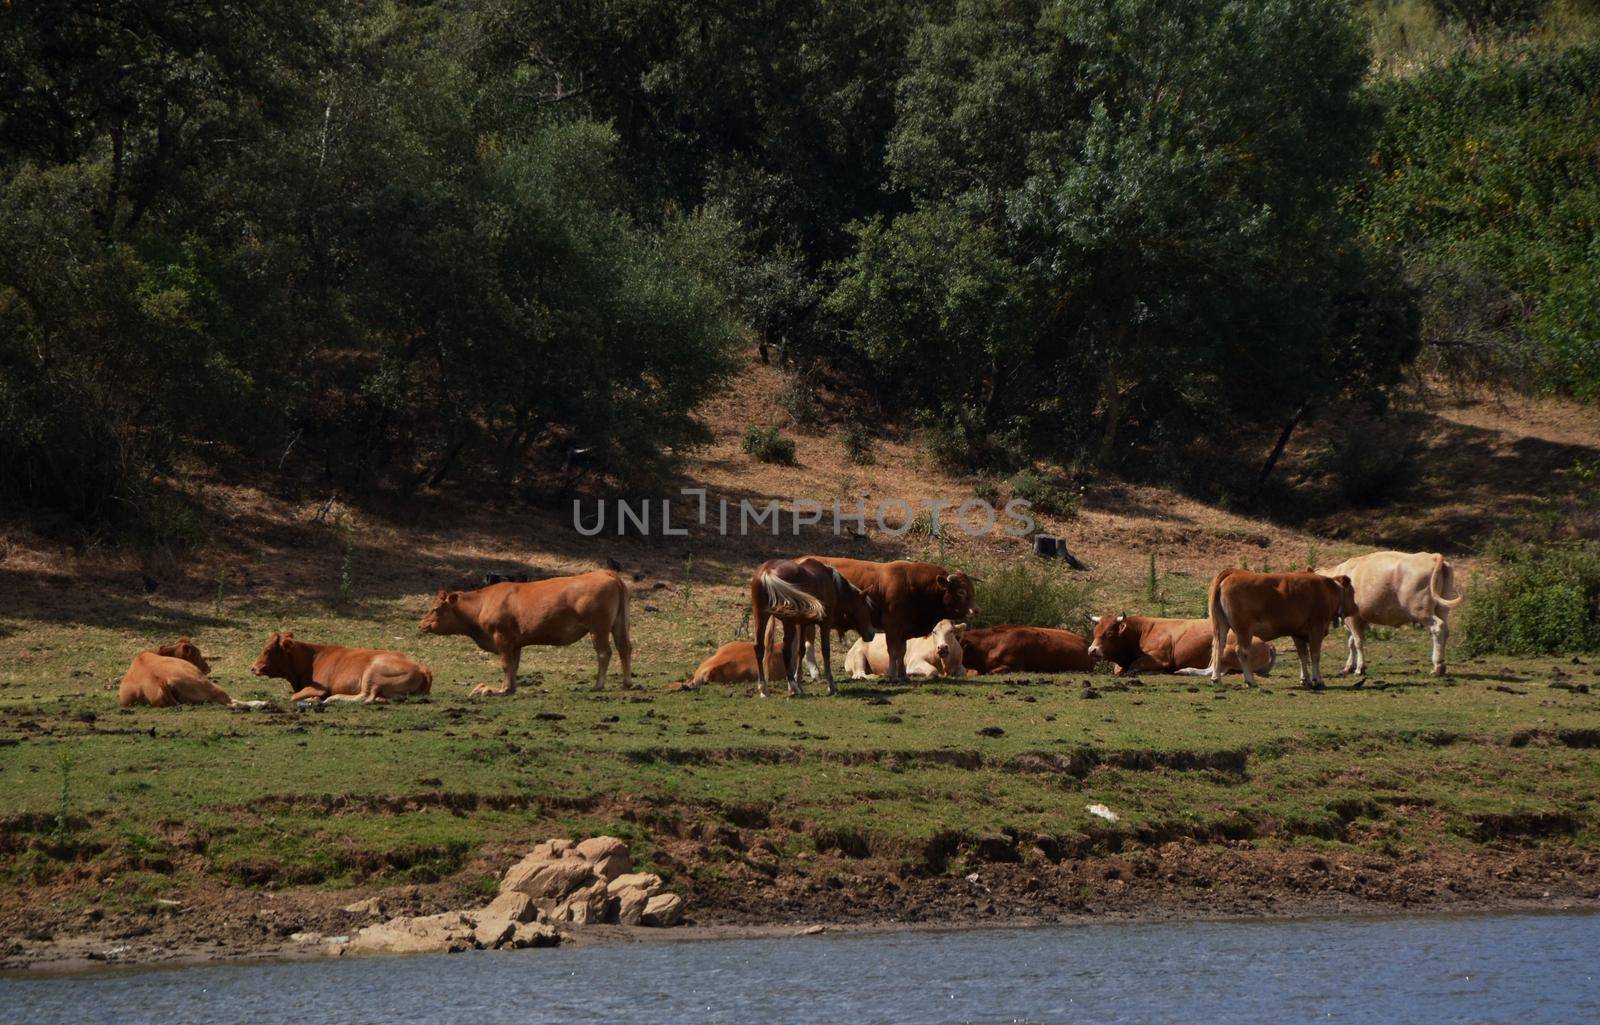 Cows and horses together resting and grazing in the meadow near the river bank